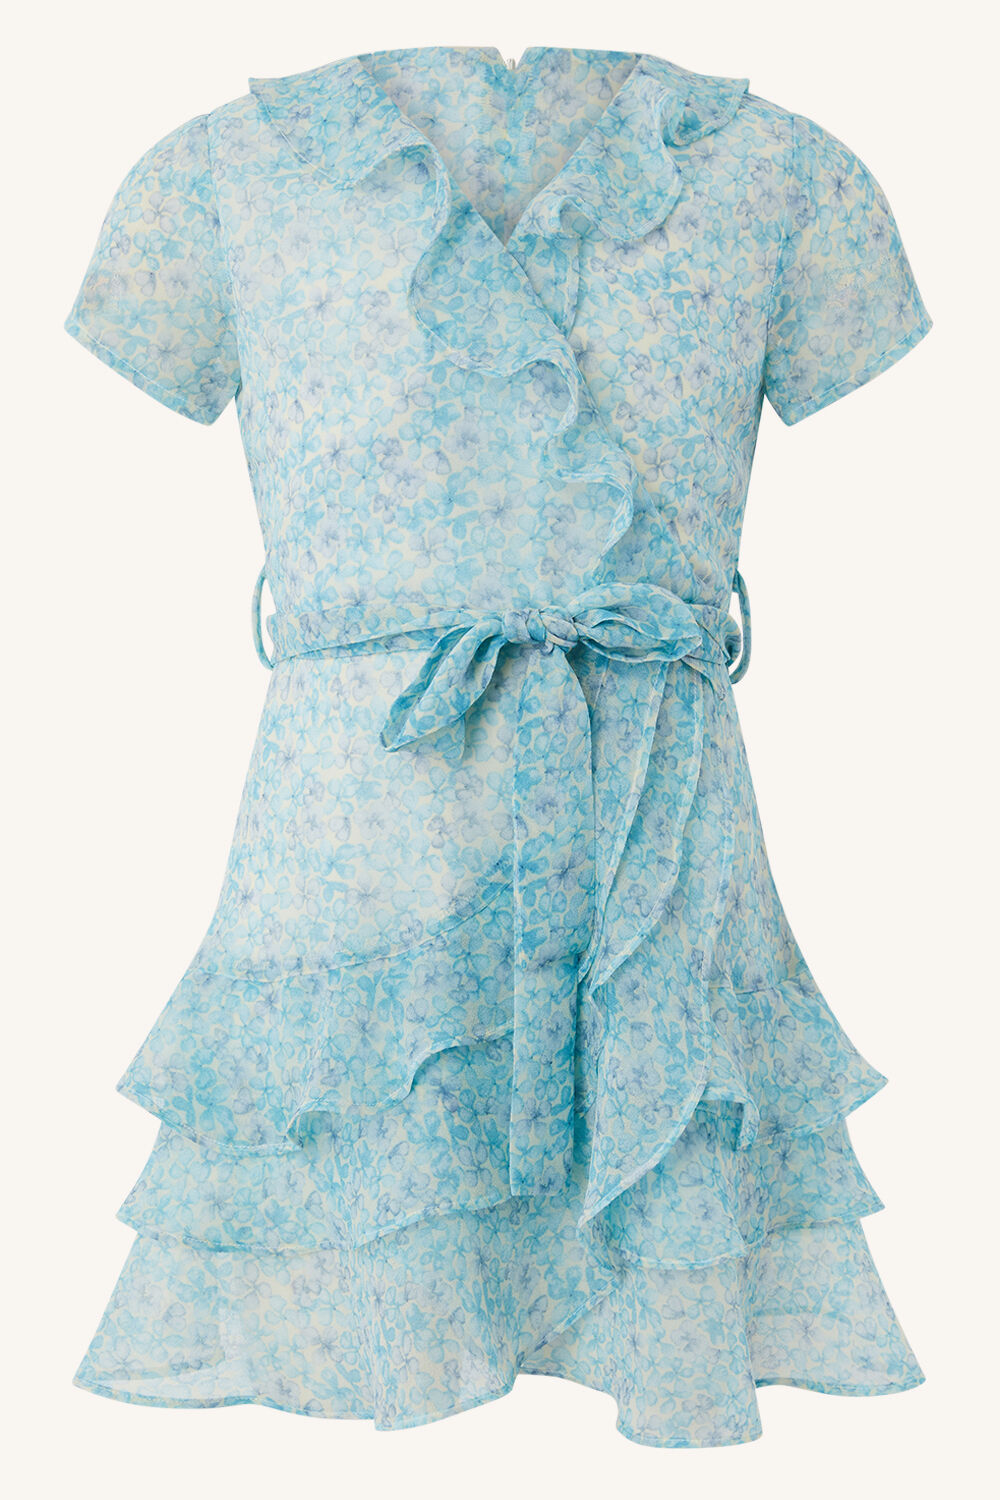 GIRLS TRIPLE FRILL FLORAL DRESS in colour LOTUS